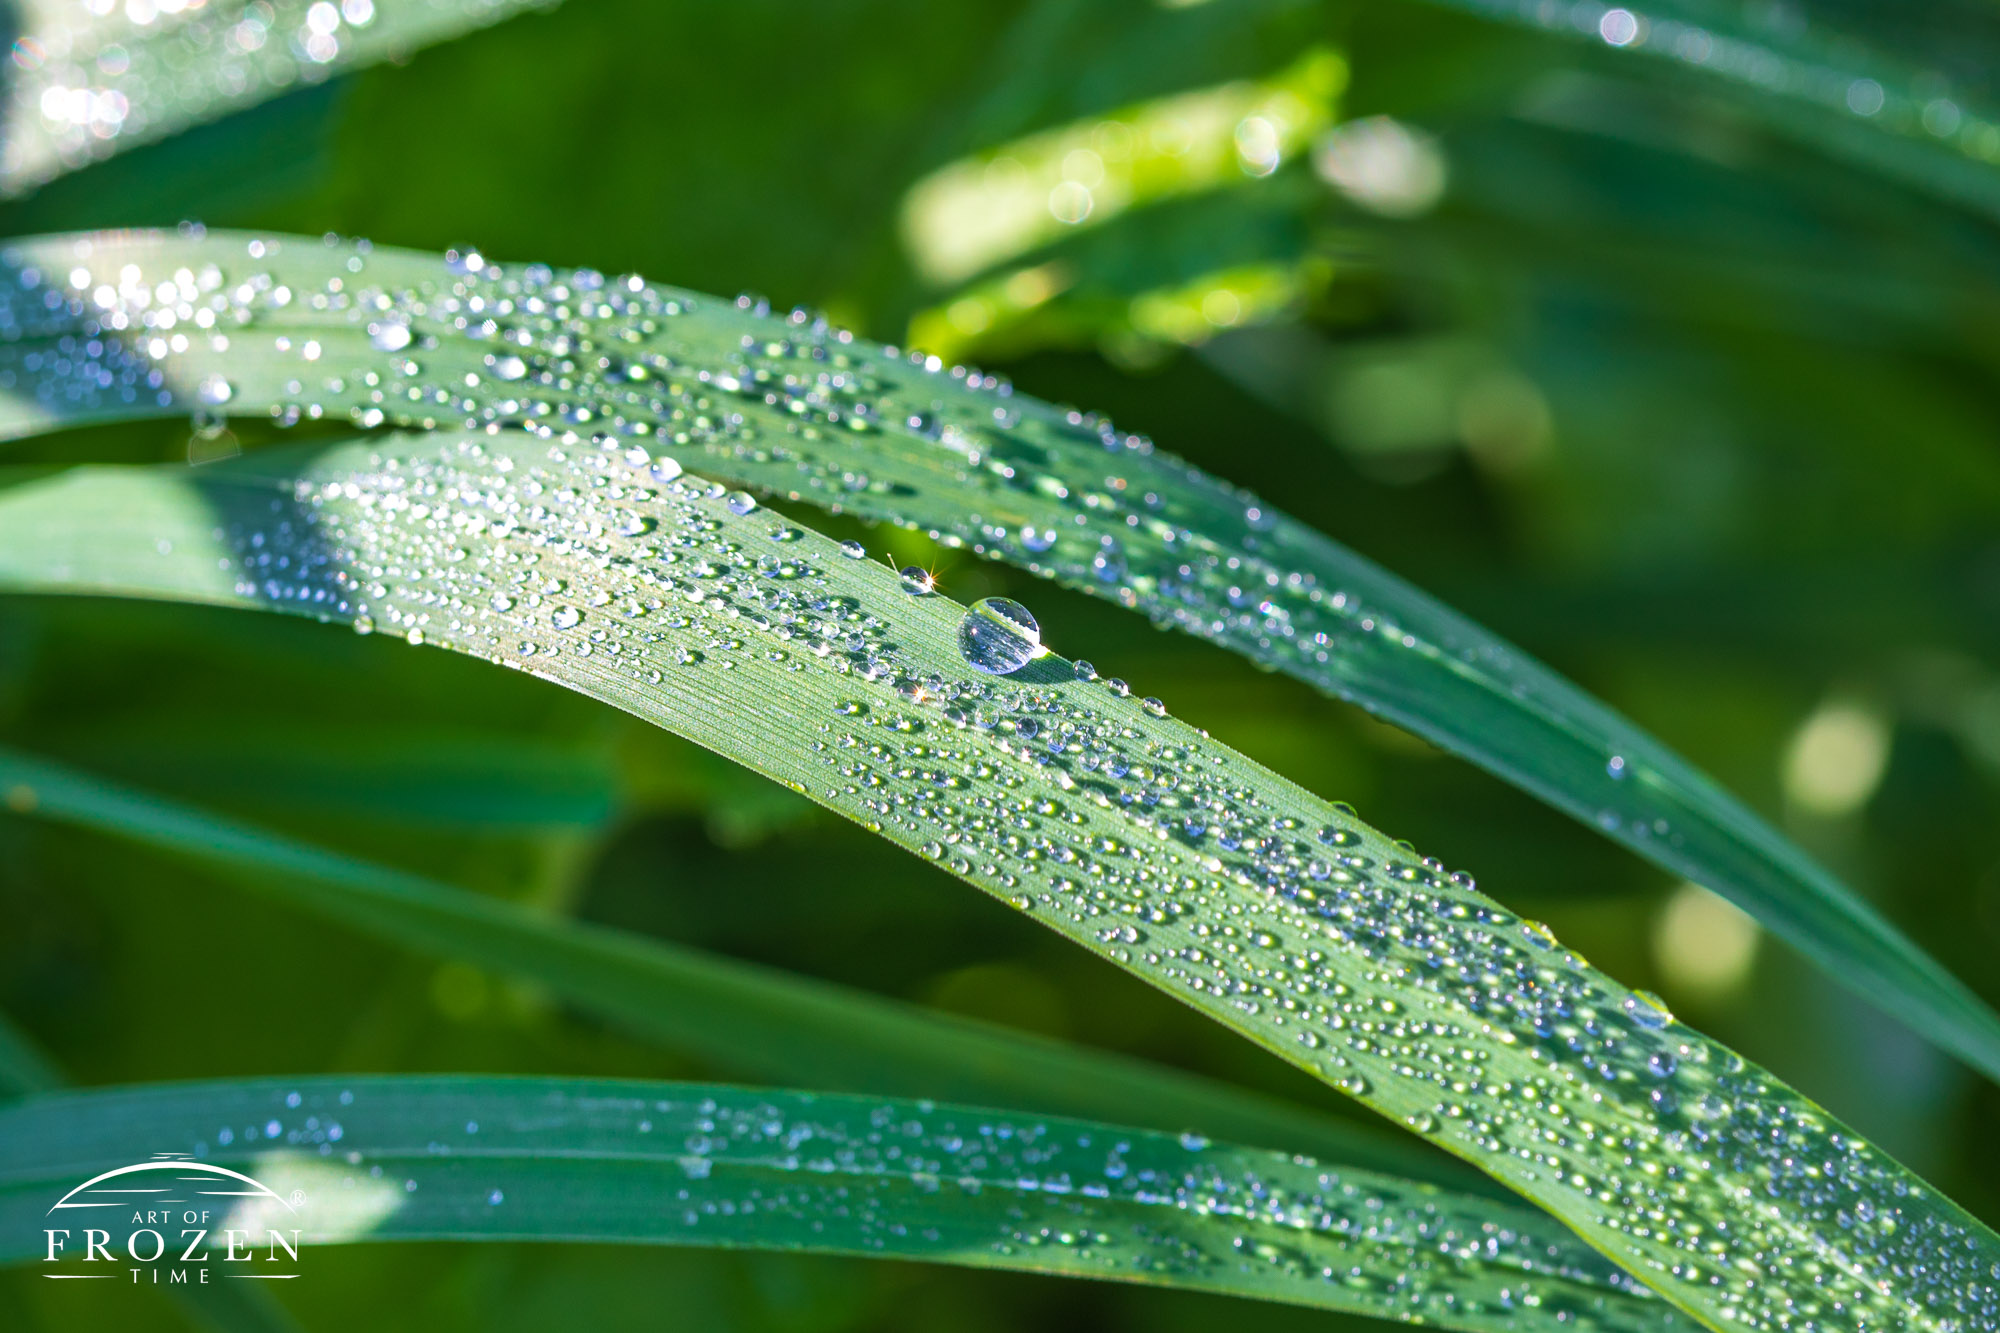 A macro view of dew drops resting on wide blades of grass, where individual drops refracted the morning golden rays into individual sun bursts of light.